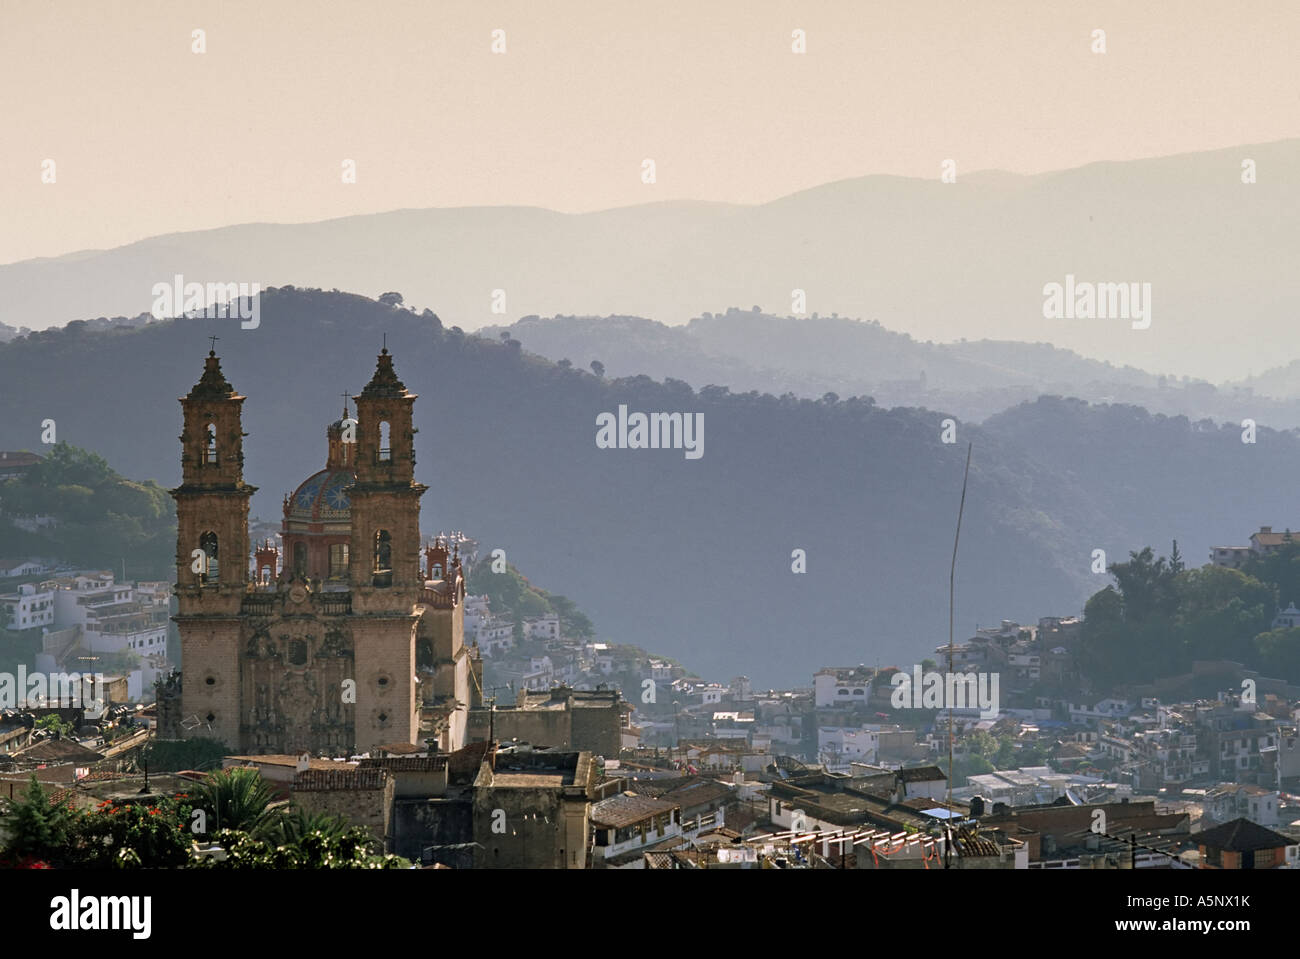 Church of Santa Prisca, designed by Miguel Custodio Duran, at sunset, view from Church of Ojeda, Taxco, Mexico Stock Photo